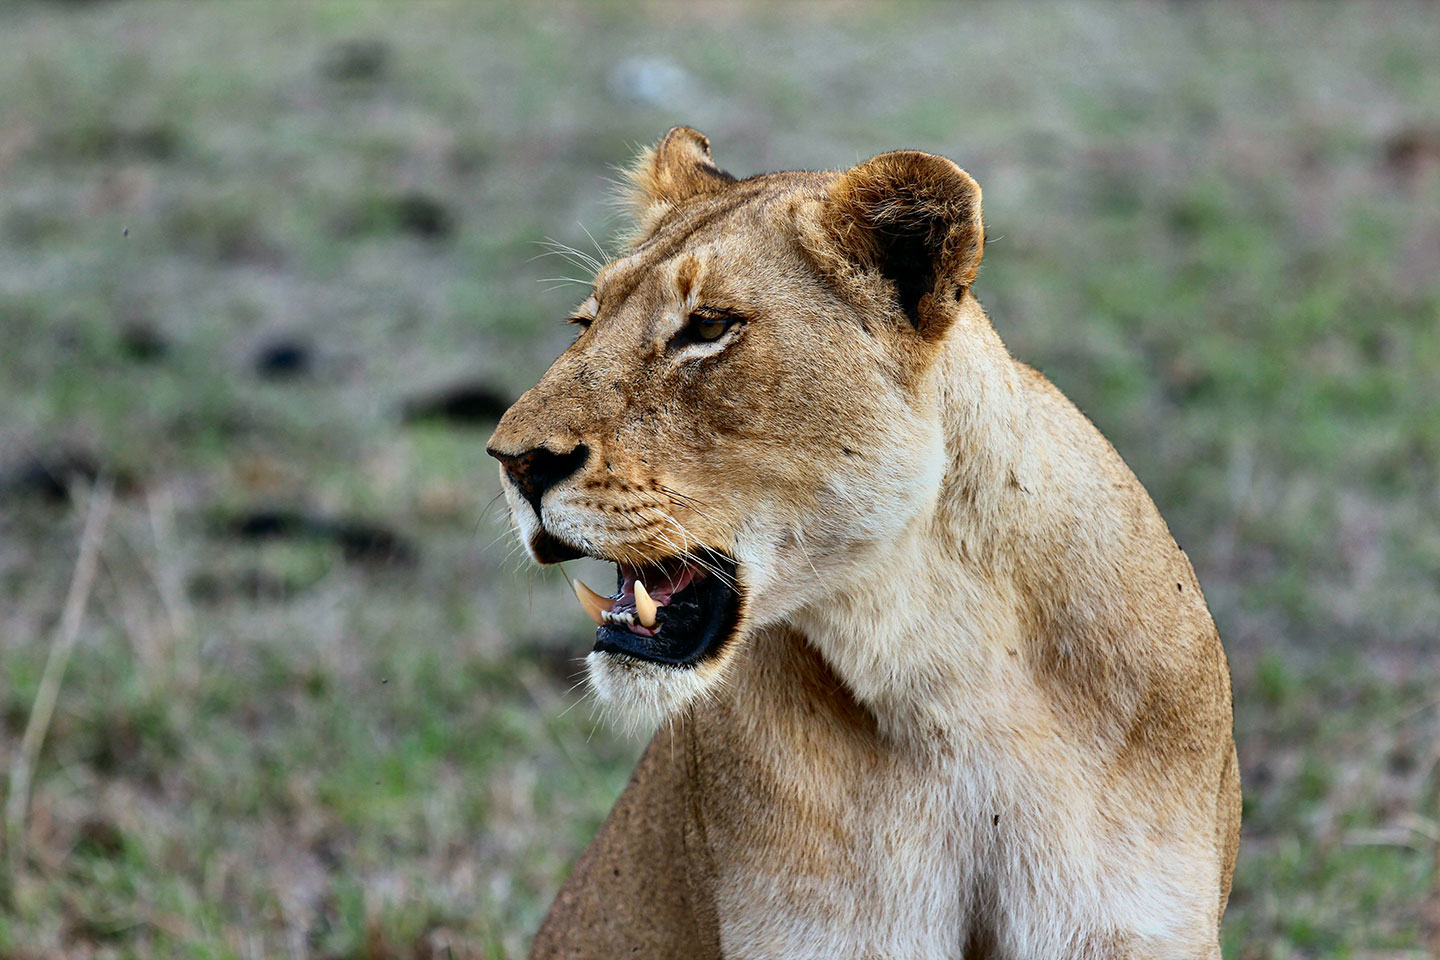 The bust of a lioness